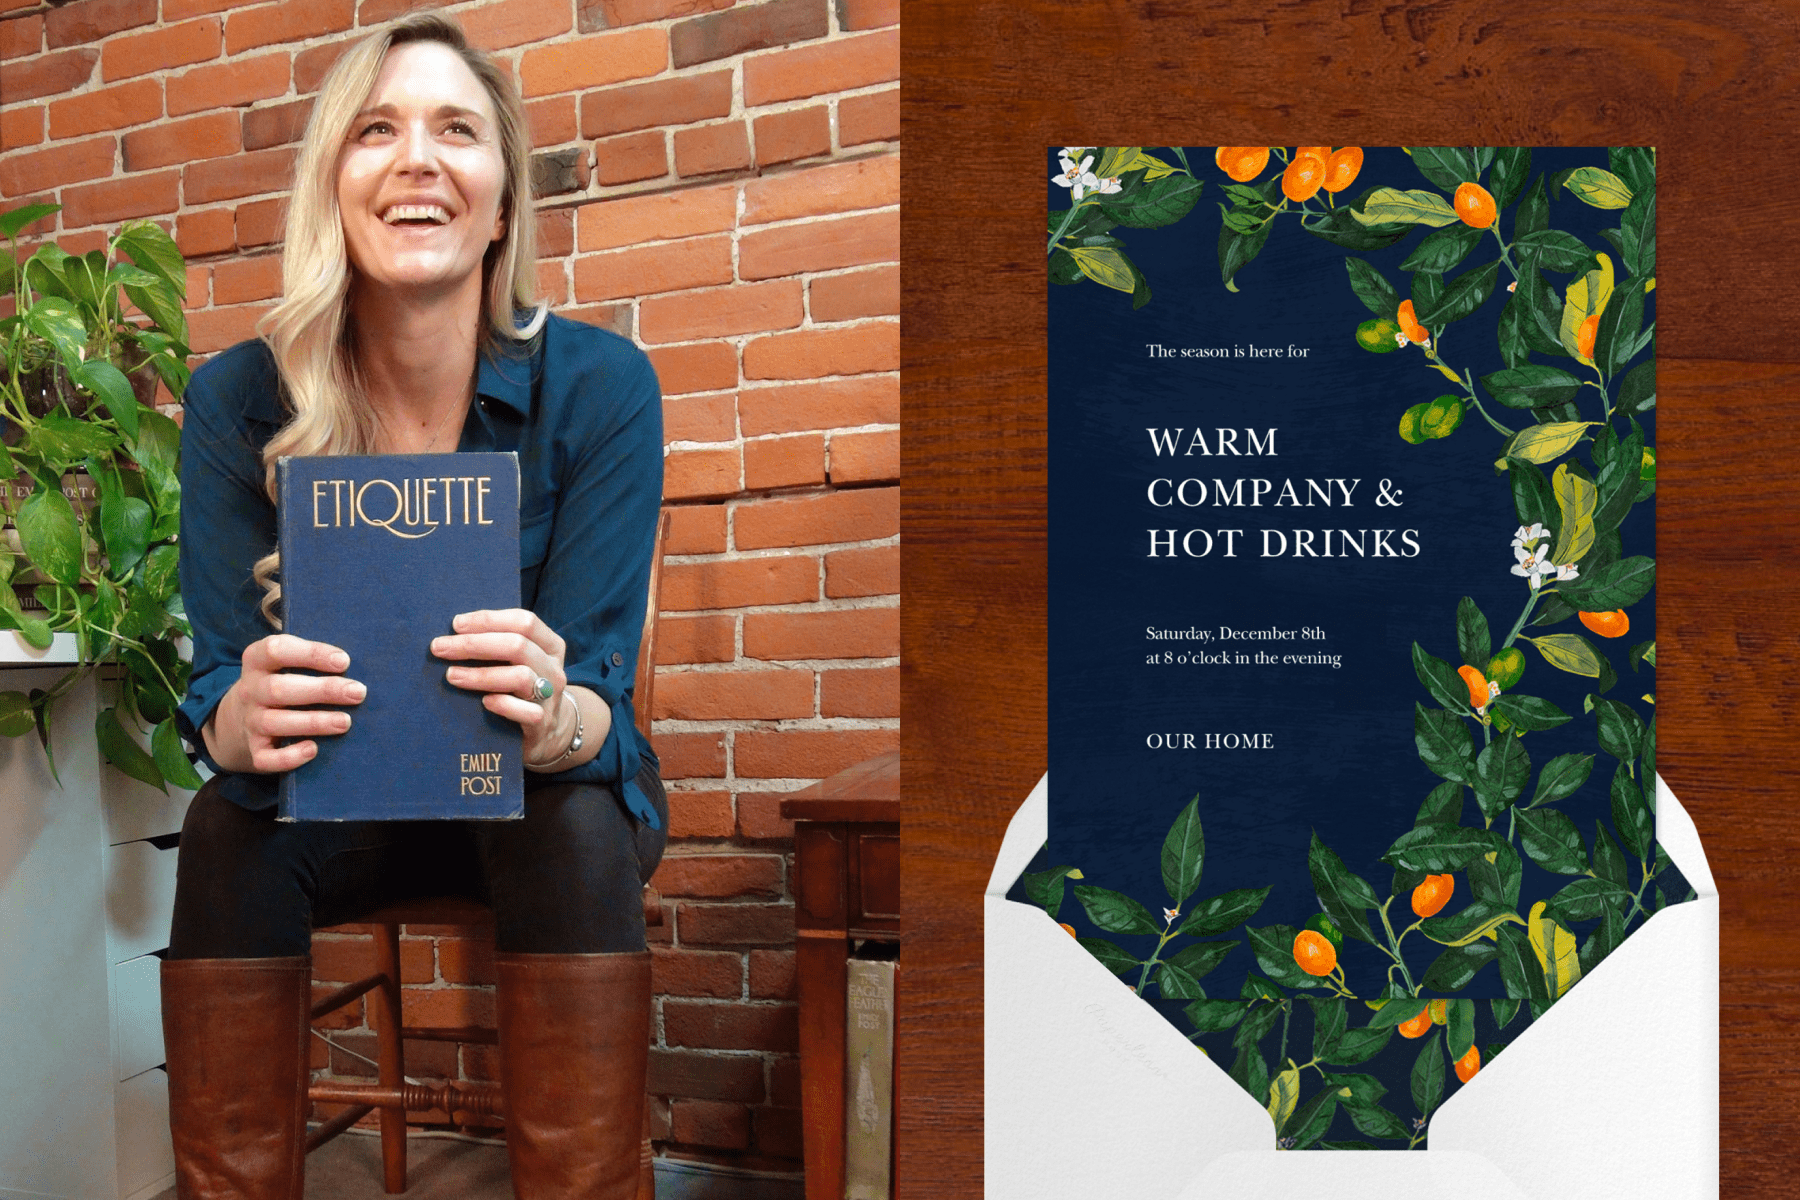 left: A blonde woman (Lizzie Post) sits in front of a brick wall while holding up a navy blue copy of “Etiquette” by Emily Post. Right: A navy blue dinner party invitation with lush branches with orange citrus fruits along the right side